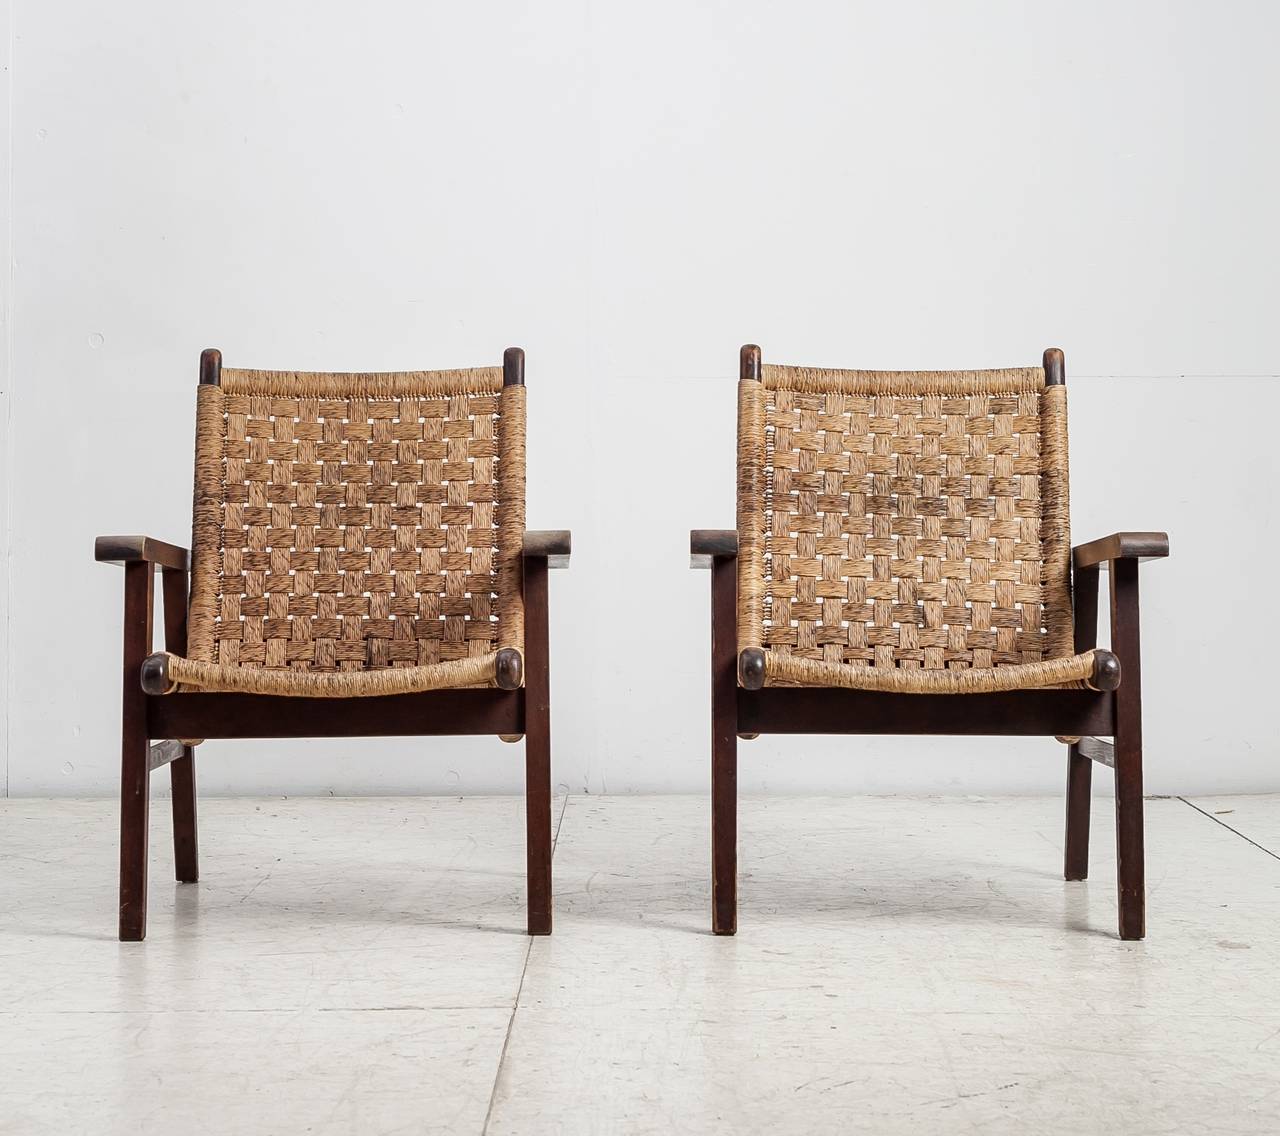 A pair of Mexican lounge chairs with woven cord seating, attributed to Michael van Beuren.
They have a wonderful patina and are in an excellent condition.

American-born, Bauhaus-trained Michael van Beuren moved to Mexico in 1937, where he